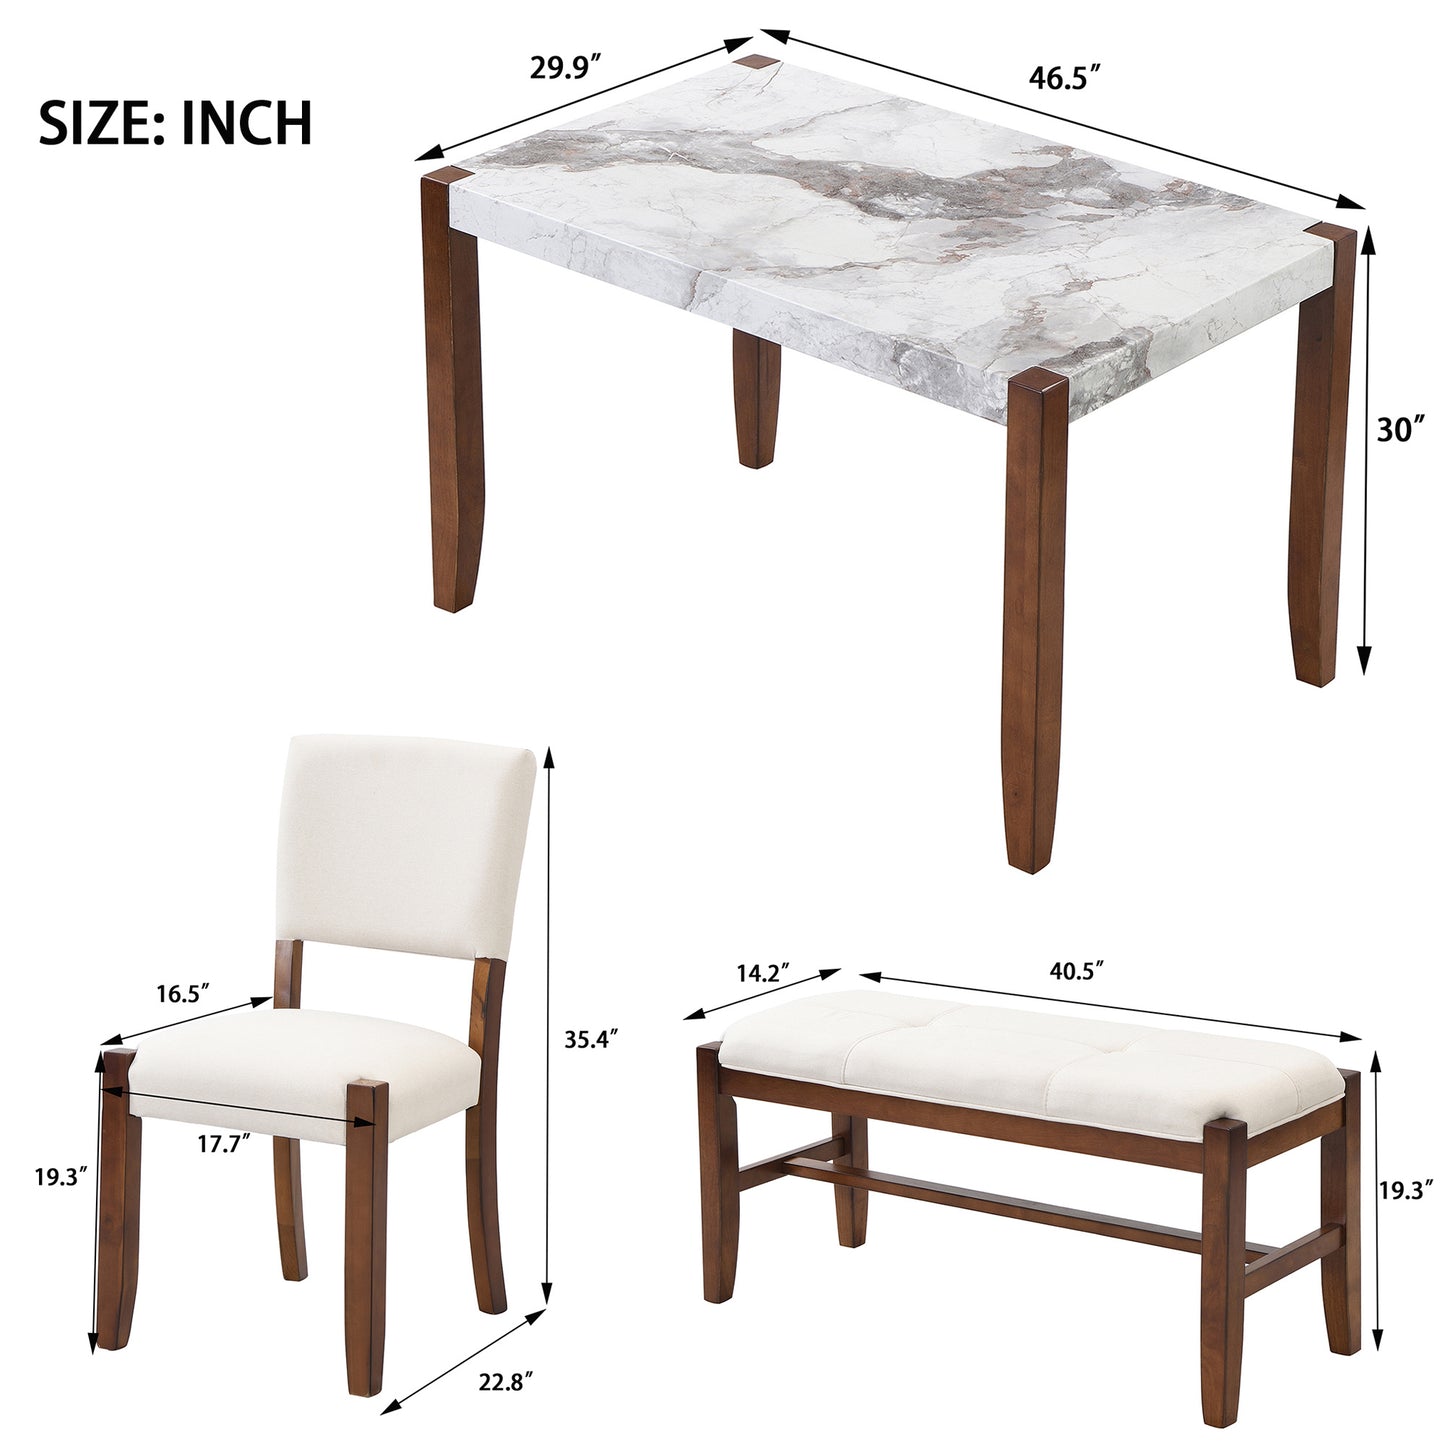 Contemporary 4-Piece Dining Room Furniture Collection